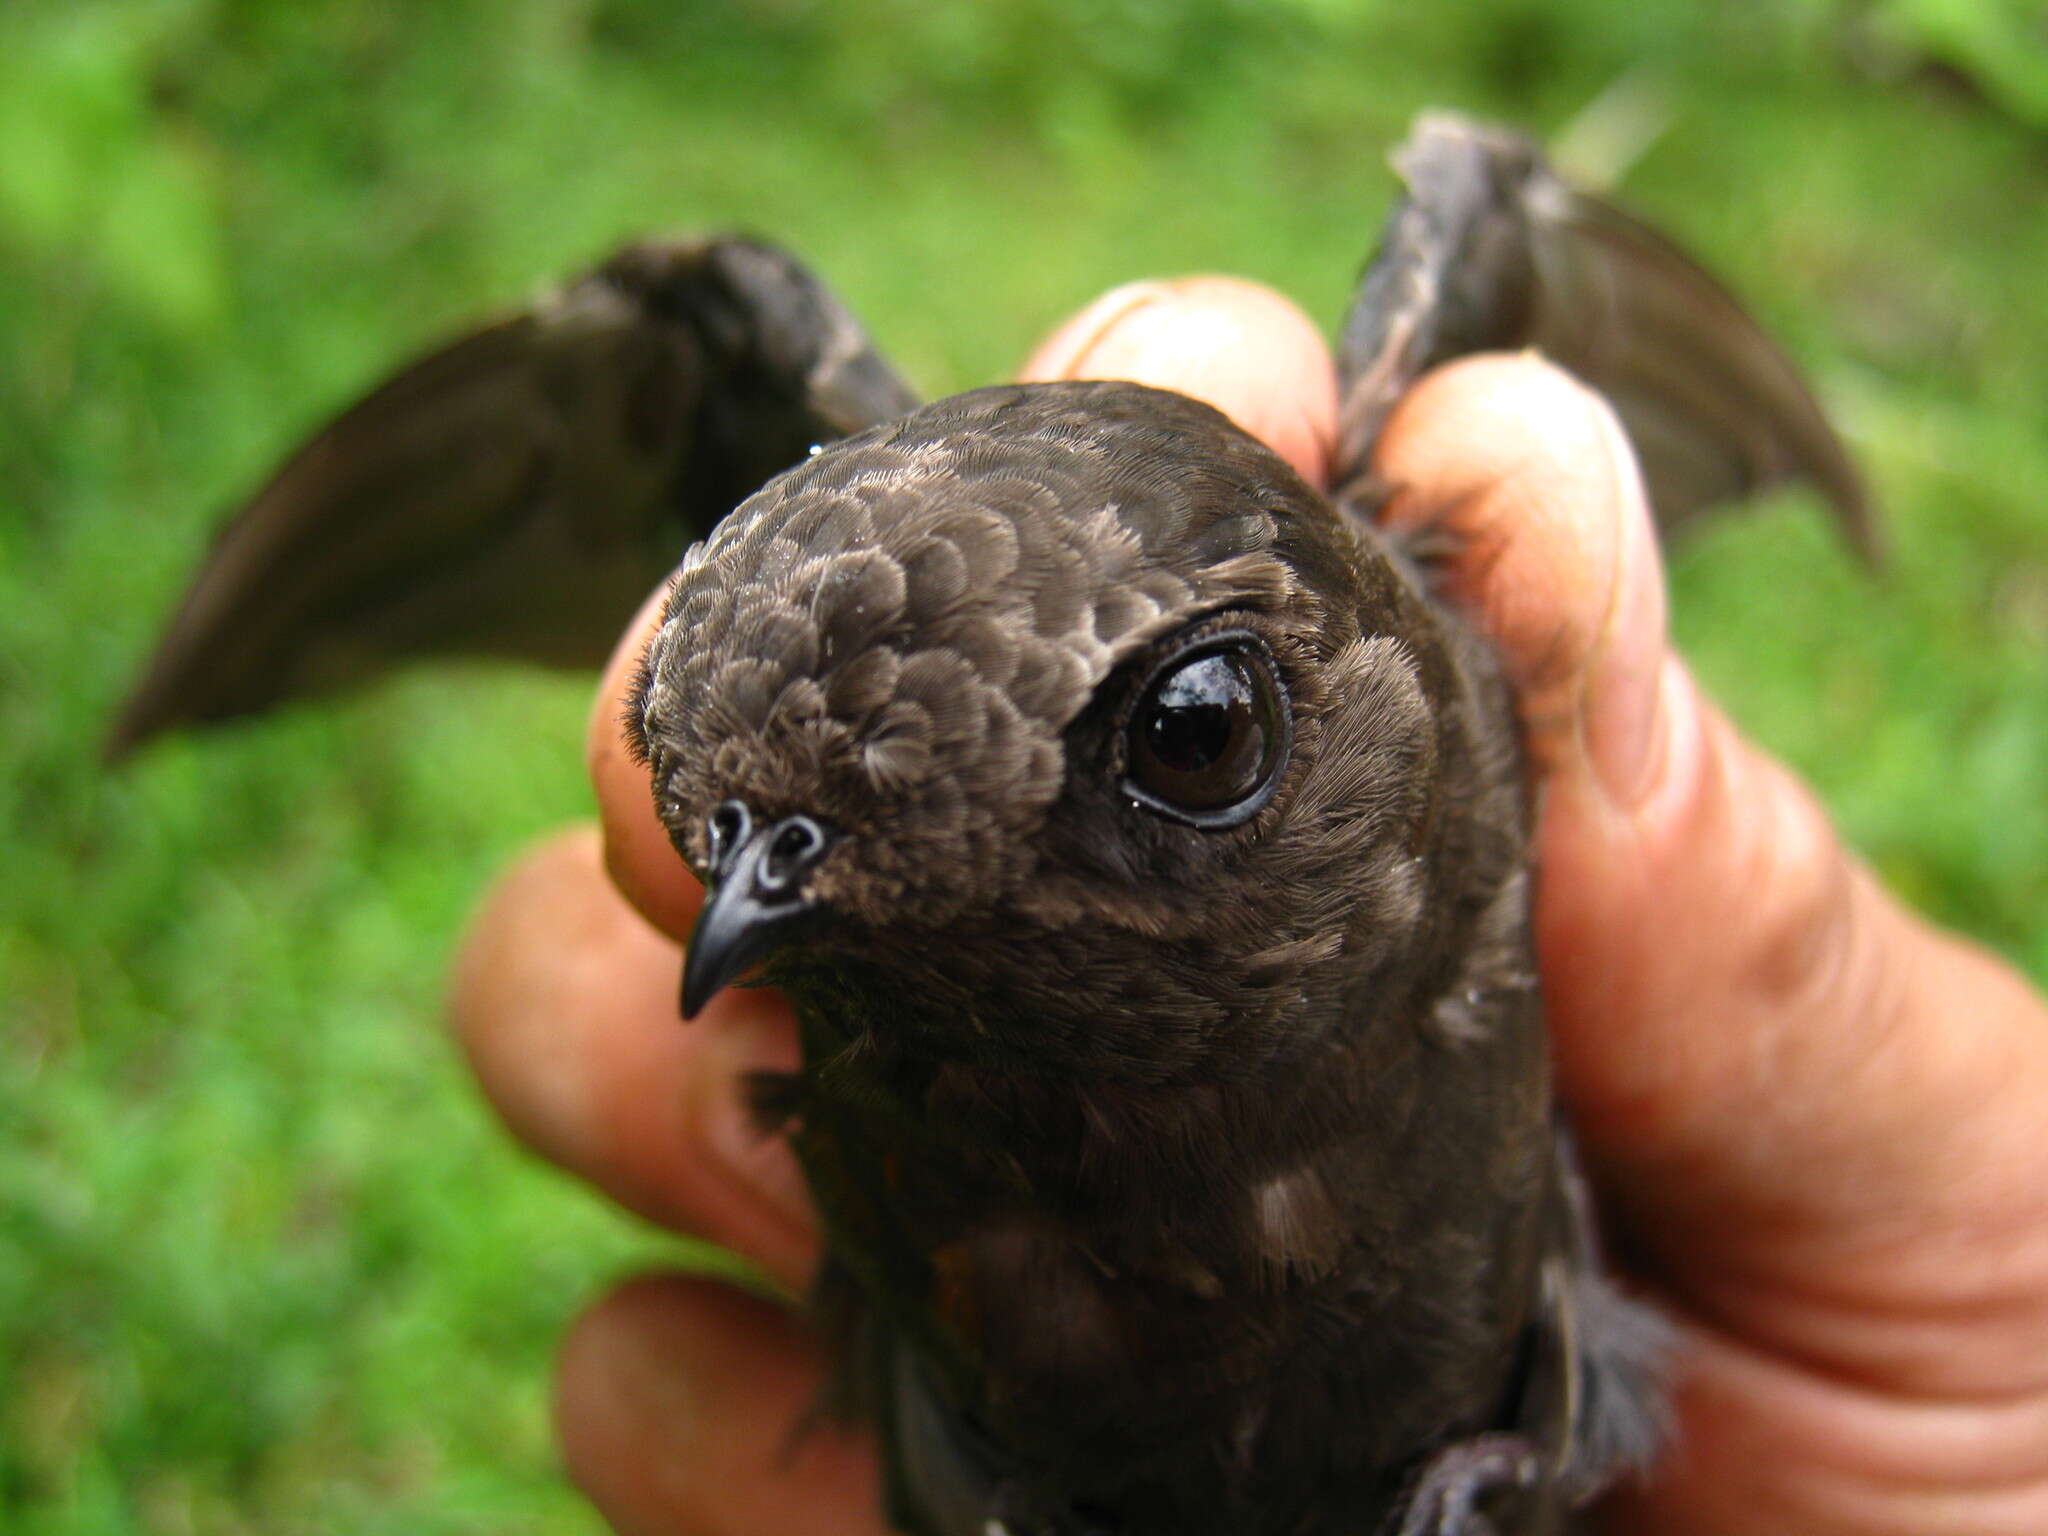 Image of Chestnut-collared Swift